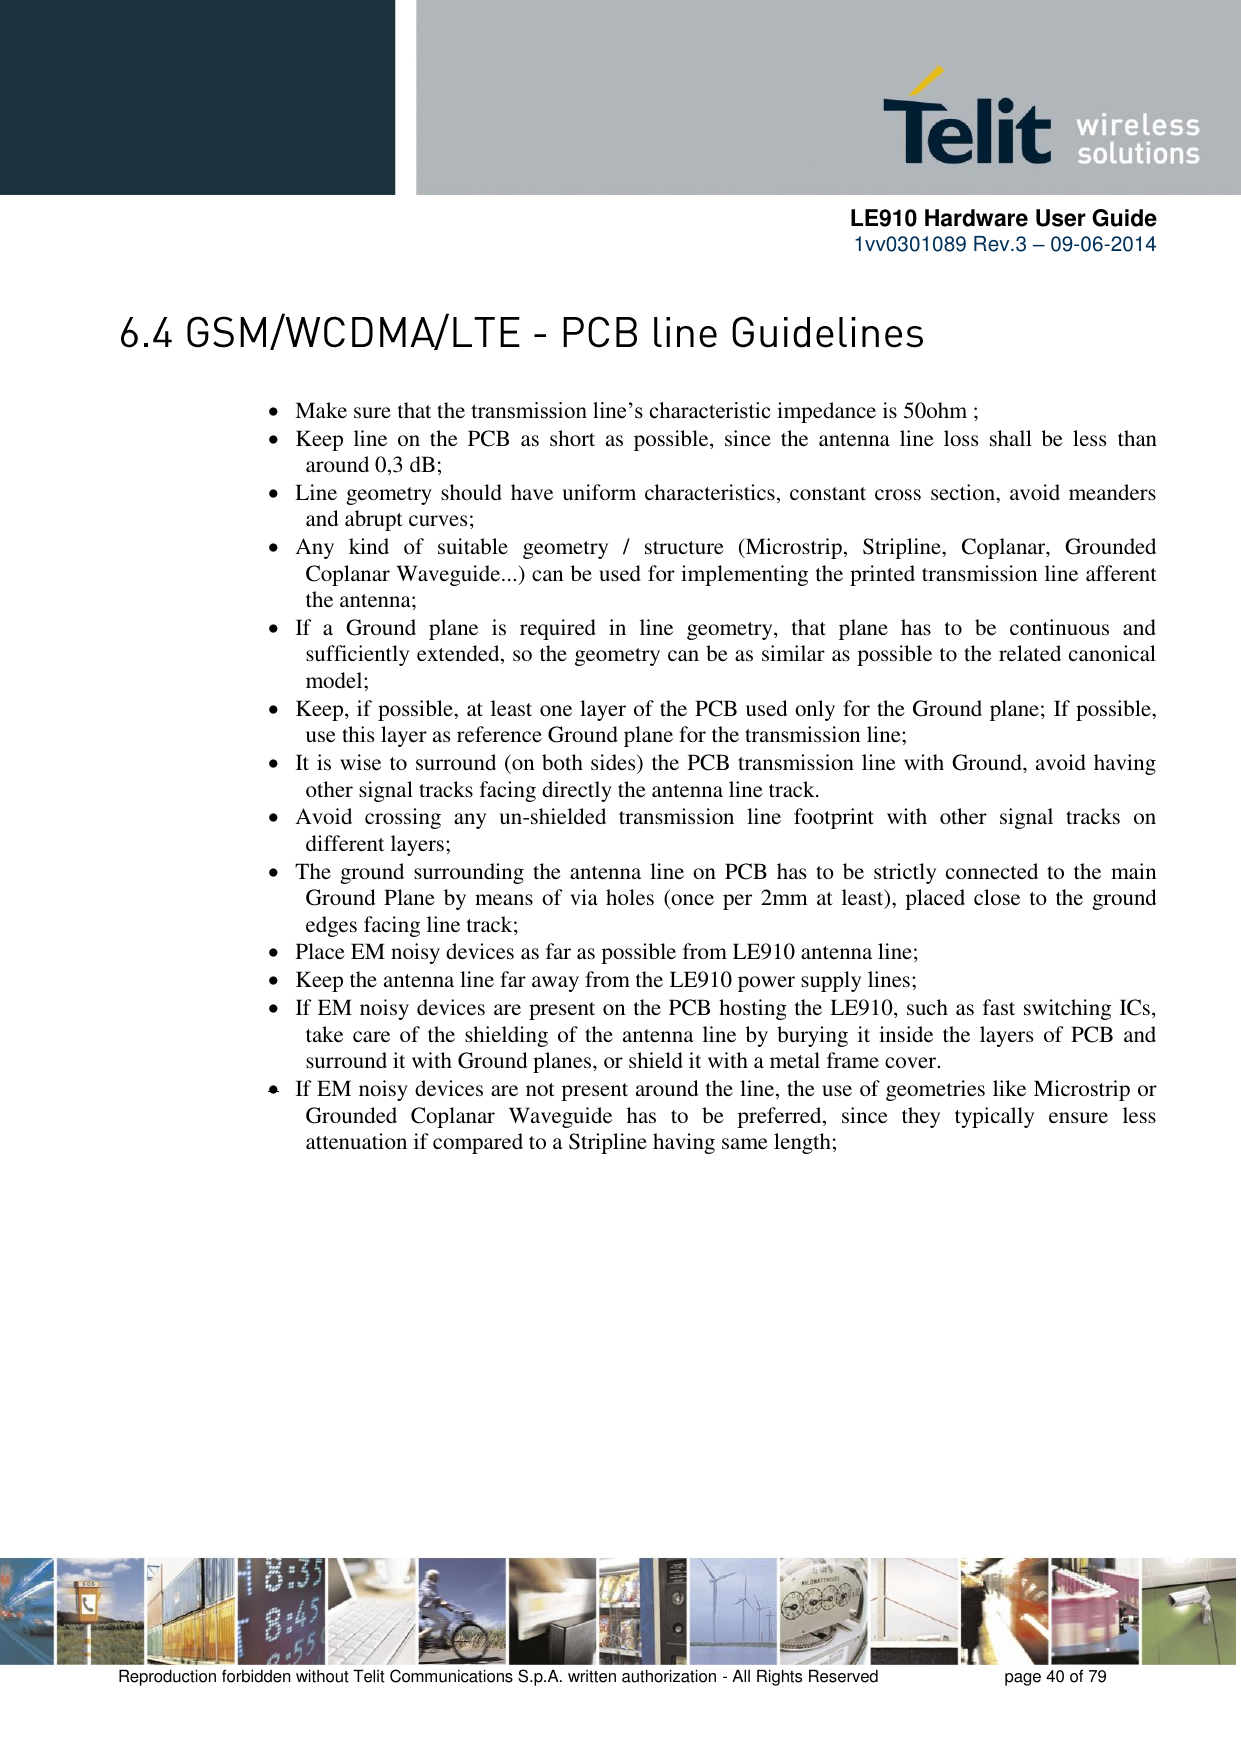      LE910 Hardware User Guide 1vv0301089 Rev.3 – 09-06-2014    Reproduction forbidden without Telit Communications S.p.A. written authorization - All Rights Reserved    page 40 of 79    Make sure that the transmission line’s characteristic impedance is 50ohm ;  Keep  line  on  the  PCB  as  short  as  possible,  since  the  antenna  line  loss  shall  be  less  than around 0,3 dB;  Line geometry should have uniform characteristics, constant cross section, avoid meanders and abrupt curves;  Any  kind  of  suitable  geometry  /  structure  (Microstrip,  Stripline,  Coplanar,  Grounded Coplanar Waveguide...) can be used for implementing the printed transmission line afferent the antenna;  If  a  Ground  plane  is  required  in  line  geometry,  that  plane  has  to  be  continuous  and sufficiently extended, so the geometry can be as similar as possible to the related canonical model;  Keep, if possible, at least one layer of the PCB used only for the Ground plane; If possible, use this layer as reference Ground plane for the transmission line;  It is wise to surround (on both sides) the PCB transmission line with Ground, avoid having other signal tracks facing directly the antenna line track.   Avoid  crossing  any  un-shielded  transmission  line  footprint  with  other  signal  tracks  on different layers;  The ground surrounding the antenna line on PCB has to be strictly connected to the  main Ground Plane by means of via holes (once per 2mm at least), placed close to the ground edges facing line track;  Place EM noisy devices as far as possible from LE910 antenna line;  Keep the antenna line far away from the LE910 power supply lines;  If EM noisy devices are present on the PCB hosting the LE910, such as fast switching ICs, take care of the shielding of the antenna line by burying it  inside the layers of PCB and surround it with Ground planes, or shield it with a metal frame cover.  If EM noisy devices are not present around the line, the use of geometries like Microstrip or Grounded  Coplanar  Waveguide  has  to  be  preferred,  since  they  typically  ensure  less attenuation if compared to a Stripline having same length;  